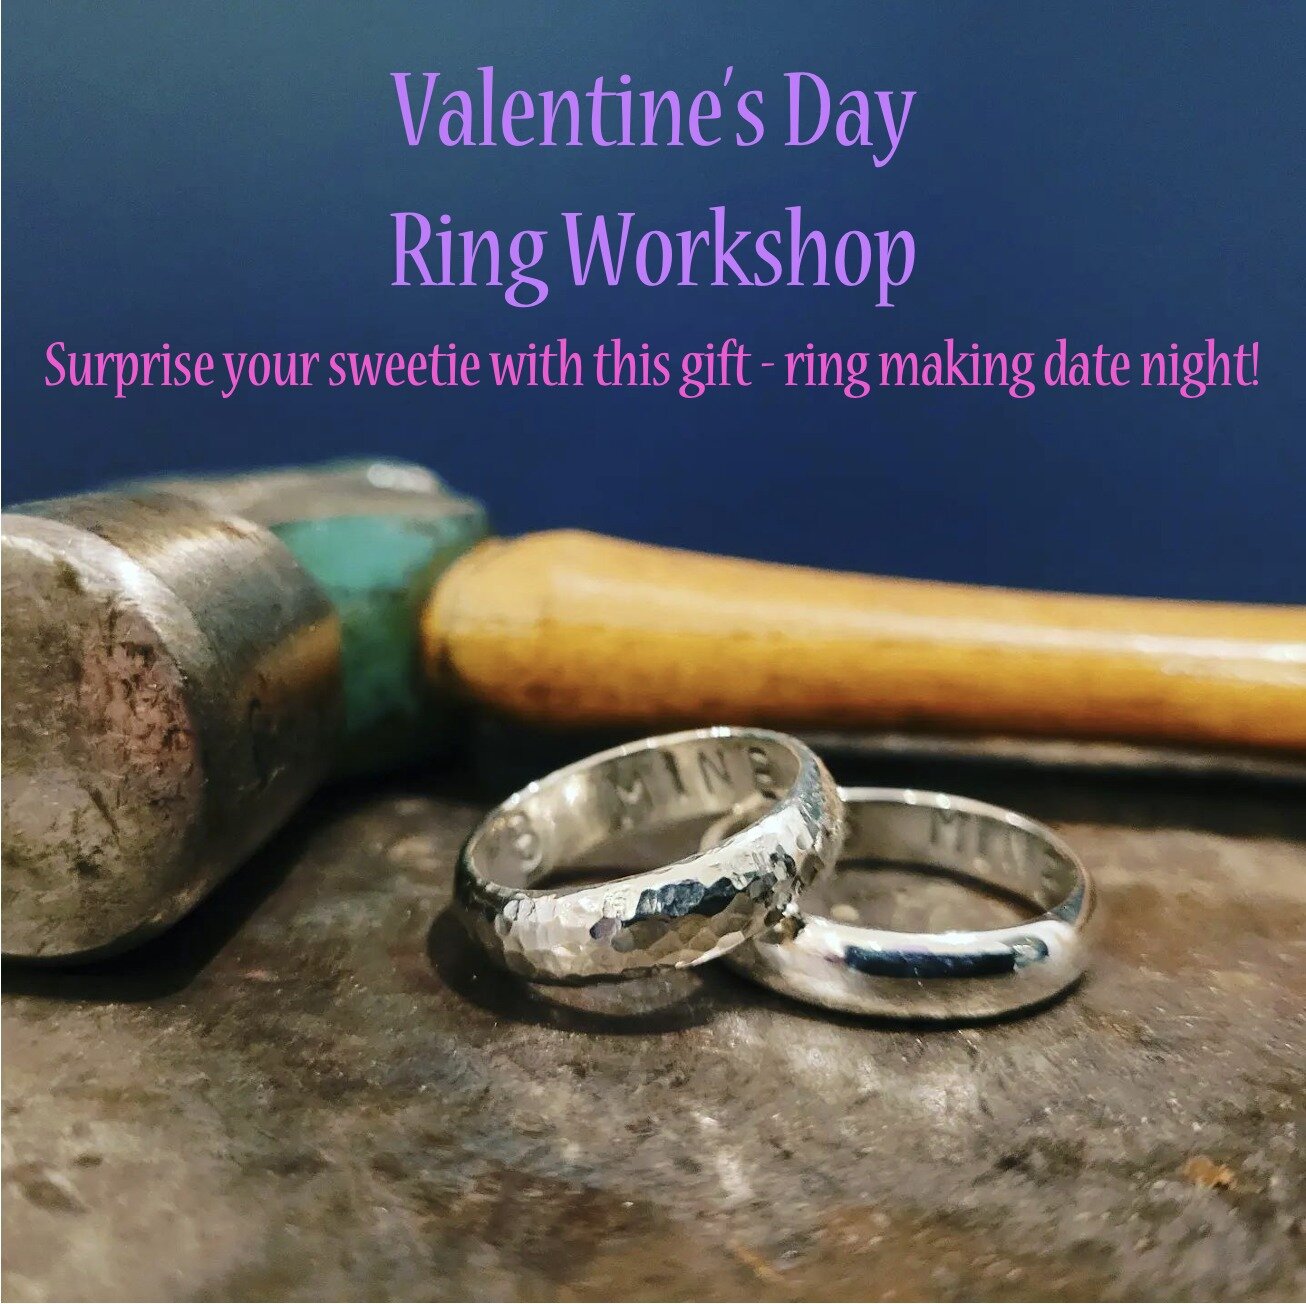 Surprise your sweetie with a ring making date night for Valentine's this year! You will each make a textured silver ring, with a secret message written on the inside. 😉😘🤫 This is our fourth year running these workshops, and it is always SUCH a gre